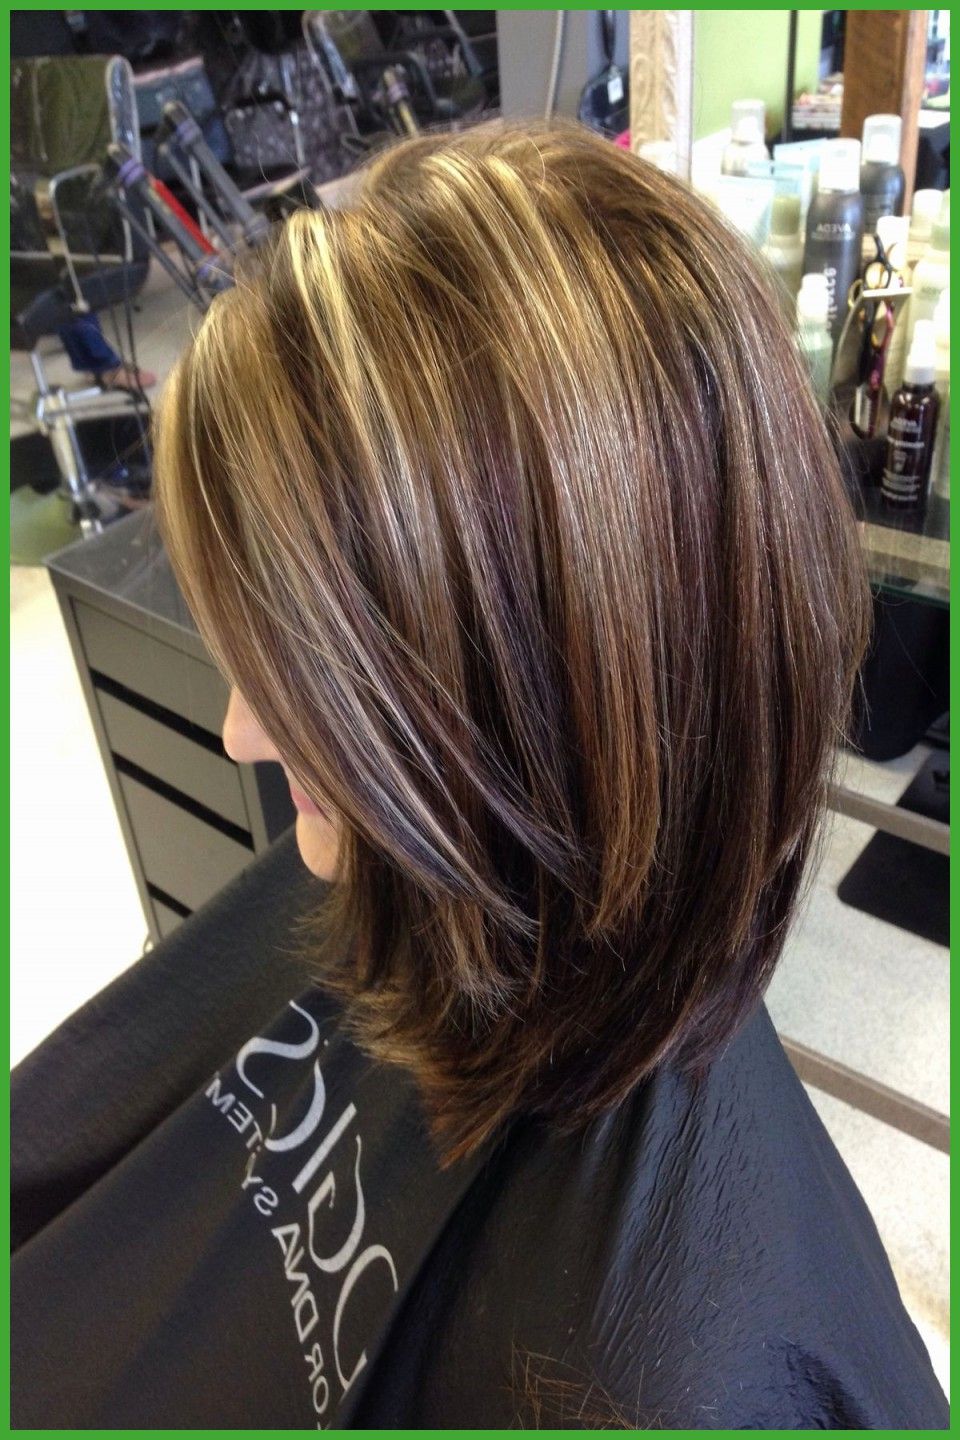 New Layer Cut Hairstyle – Hairstyle Ideas Inside Short Bob Hairstyles With Long V Cut Layers (View 20 of 20)